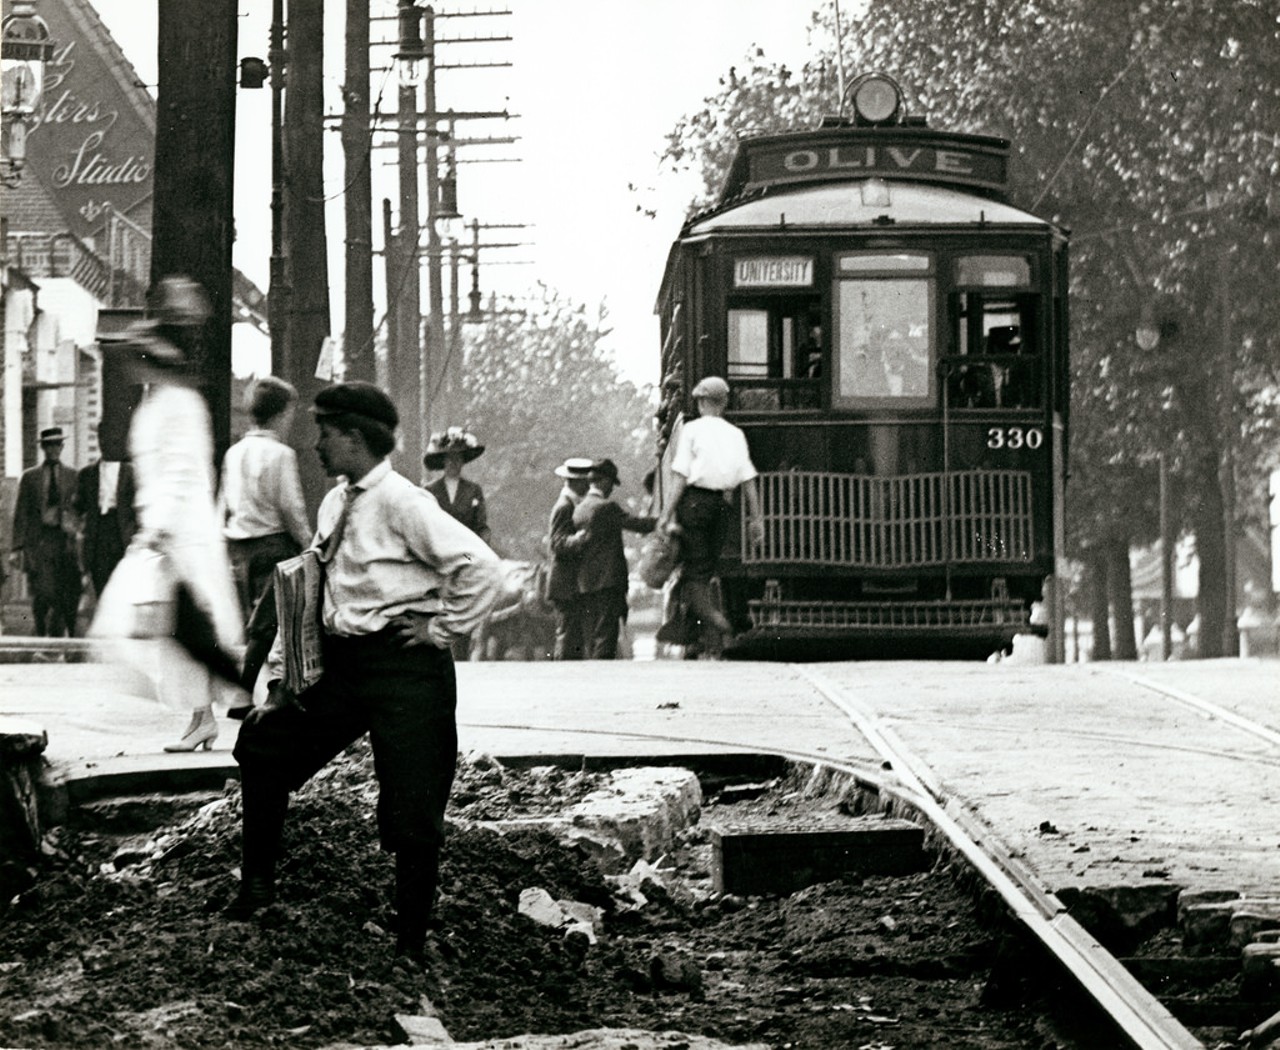 A newsboy stands in the rubble of street repair work on Olive Boulevard looking west toward Grand Avenue, ca. 1907. In the background, the Olive Boulevard streetcar line stops to pick up passengers near the photographic studio of Emme and Mayme Gerhard (visible on the left hand side of the image).